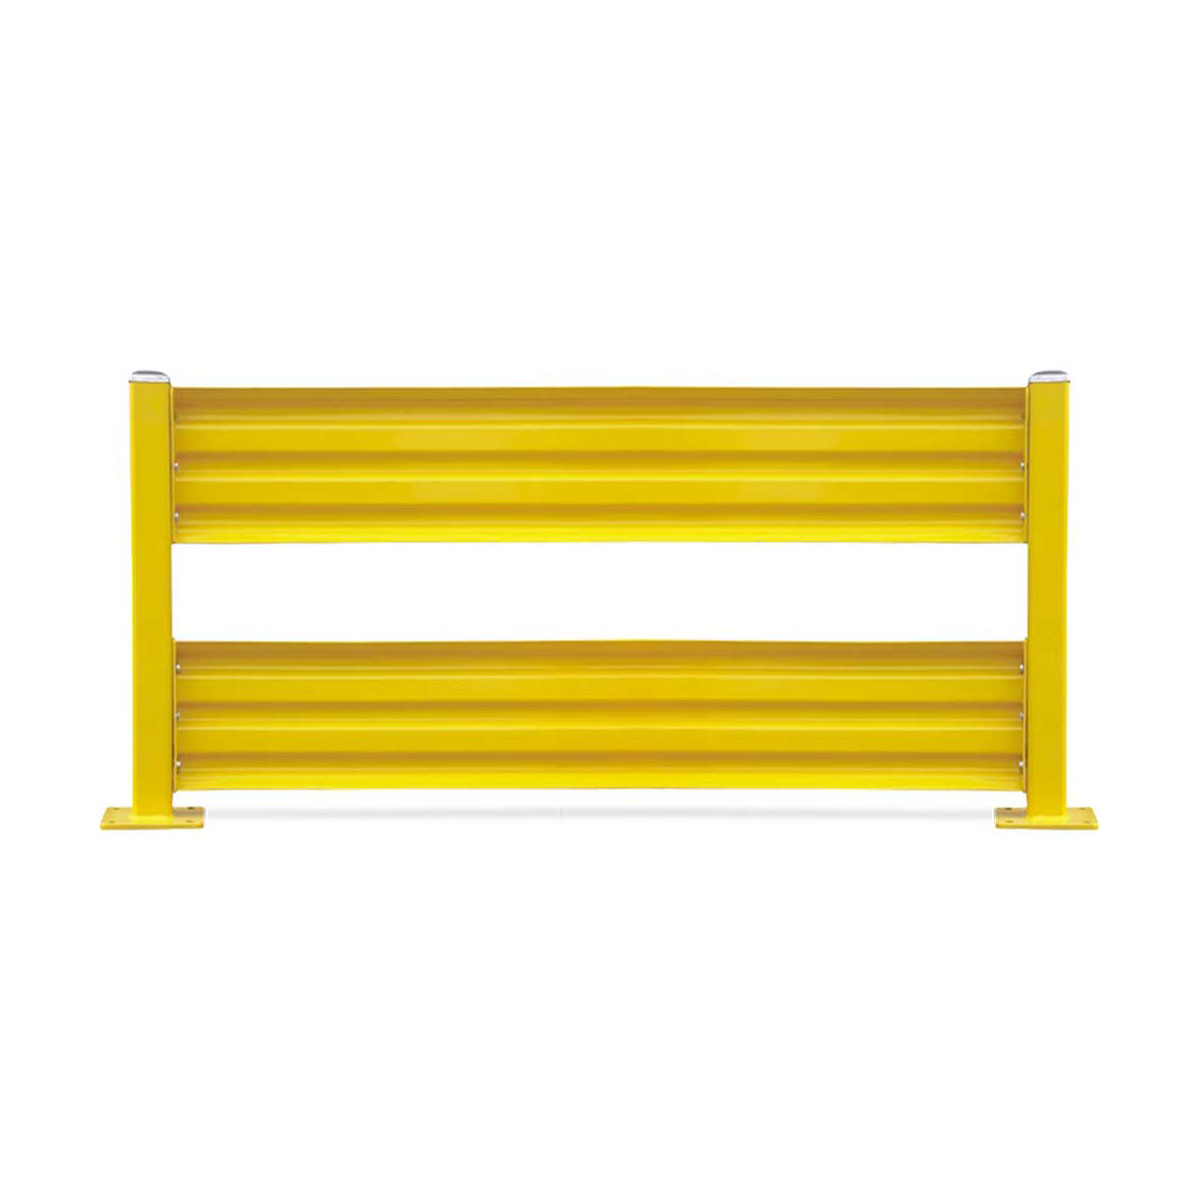 Buy Traffic Barrier Double - GuardX  in Traffic Barriers from GuardX available at Astrolift NZ